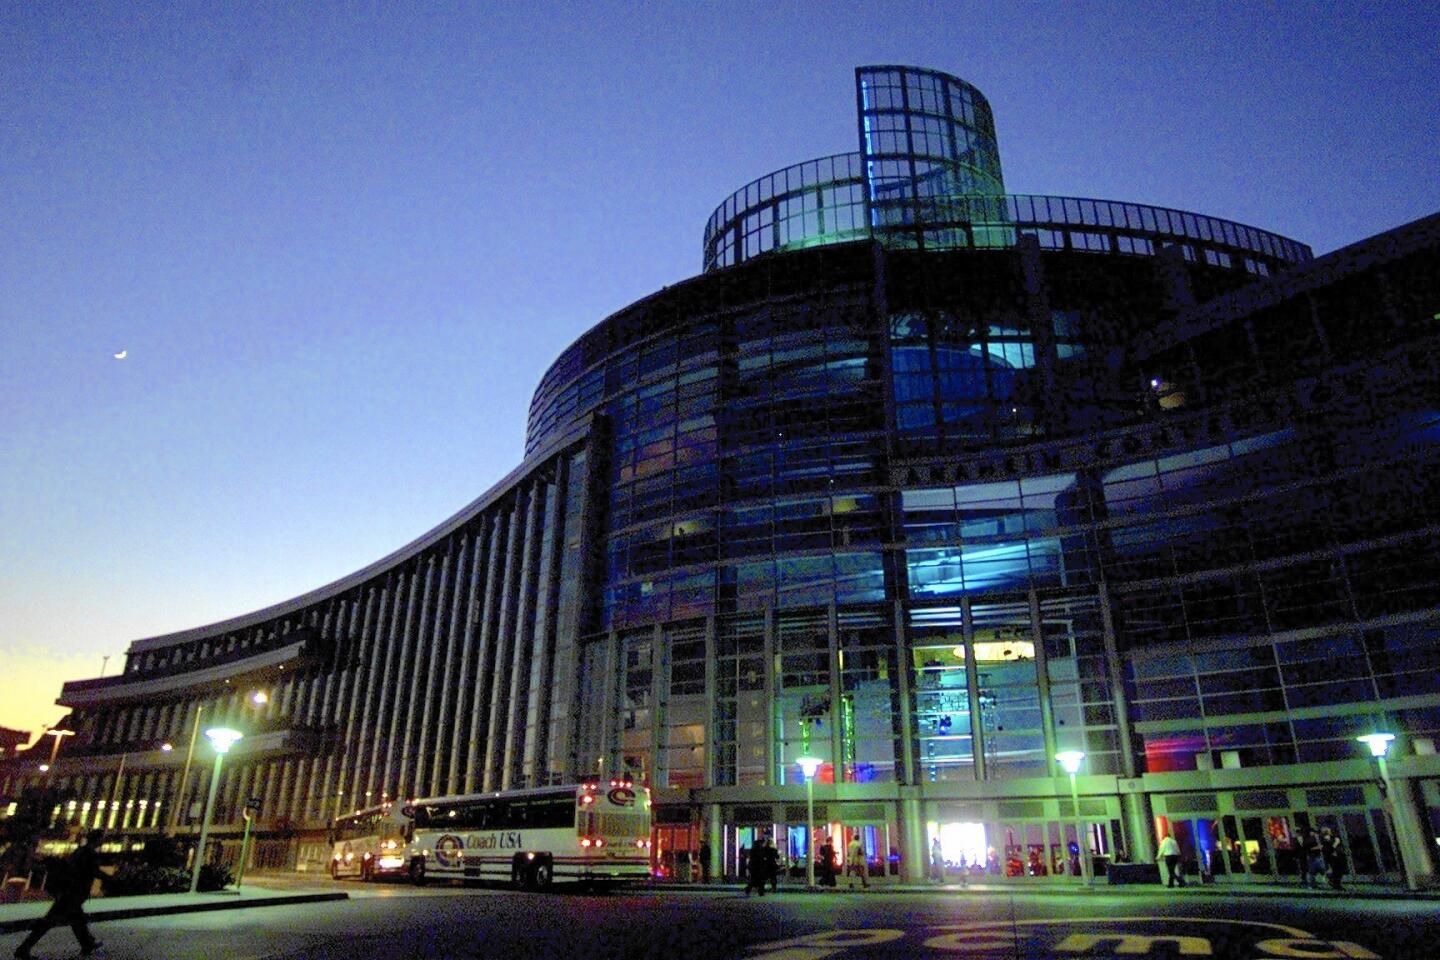 The Anaheim Convention Center at night in a photo taken in 2003.